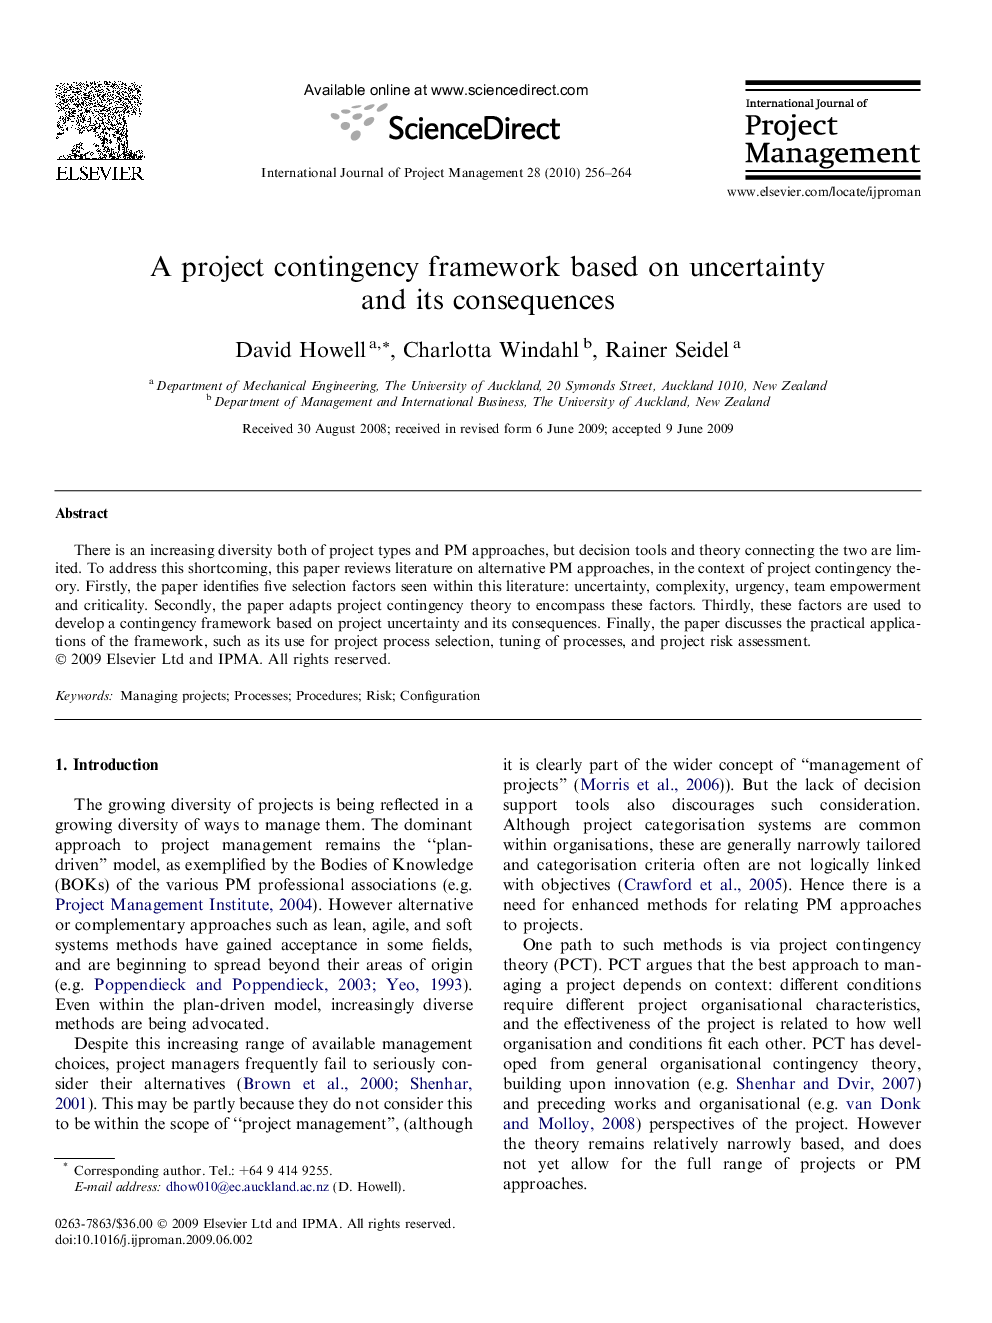 A project contingency framework based on uncertainty and its consequences